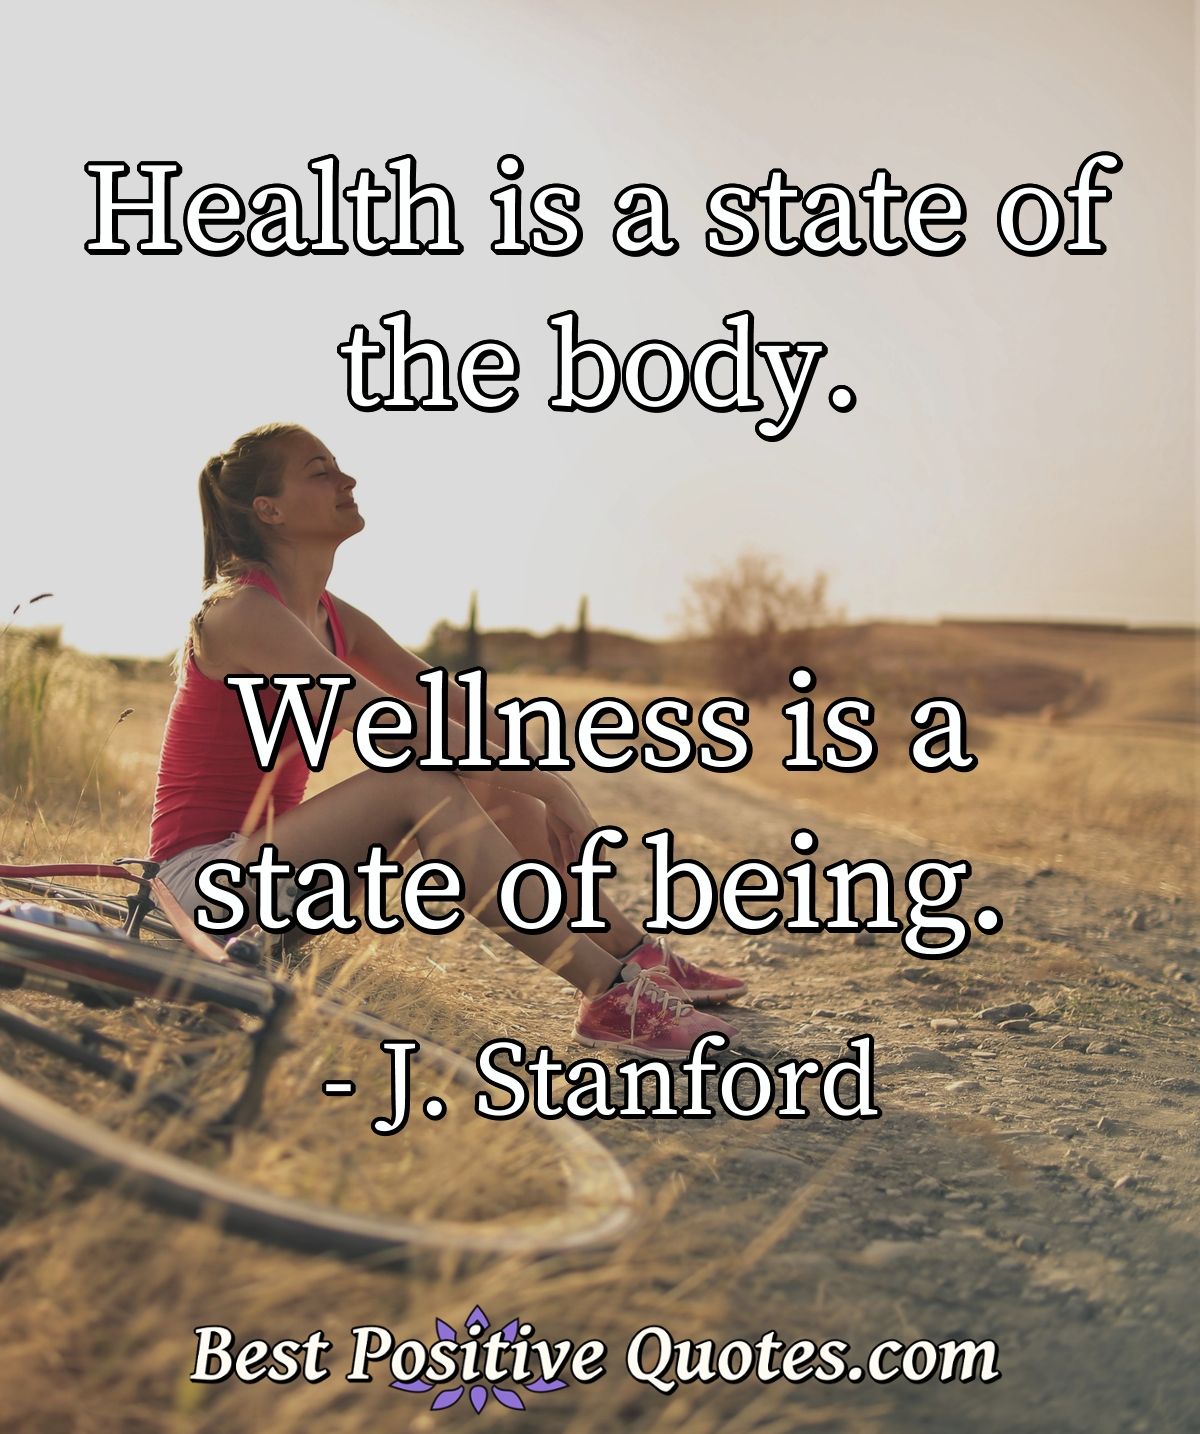 Health is a state of the body. Wellness is a state of being. - J. Stanford